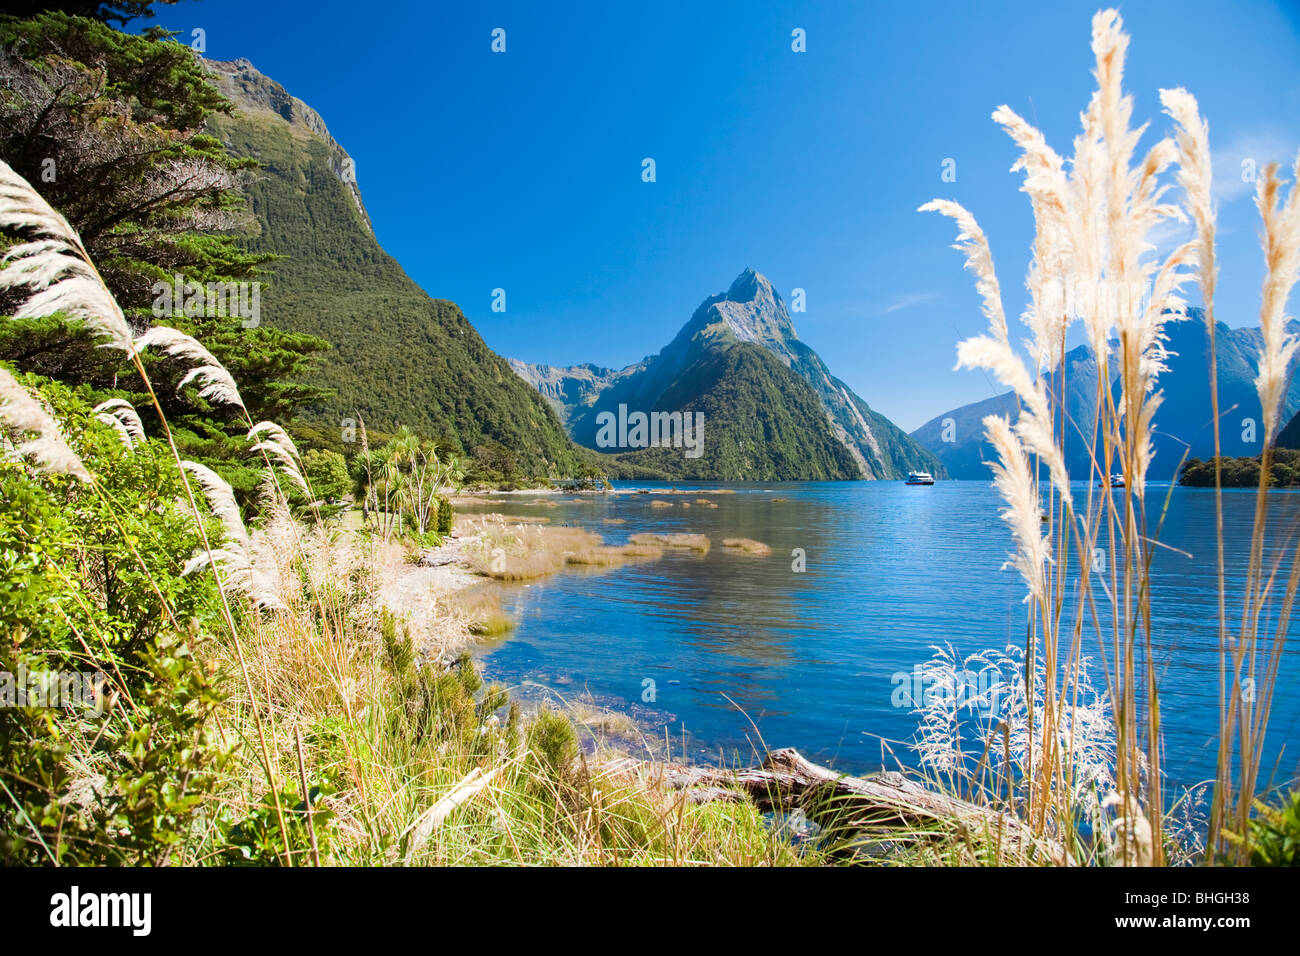 Mountain range with lake and plants, Mitre Peak, Milford Sound, South Island, New Zealand Stock Photo